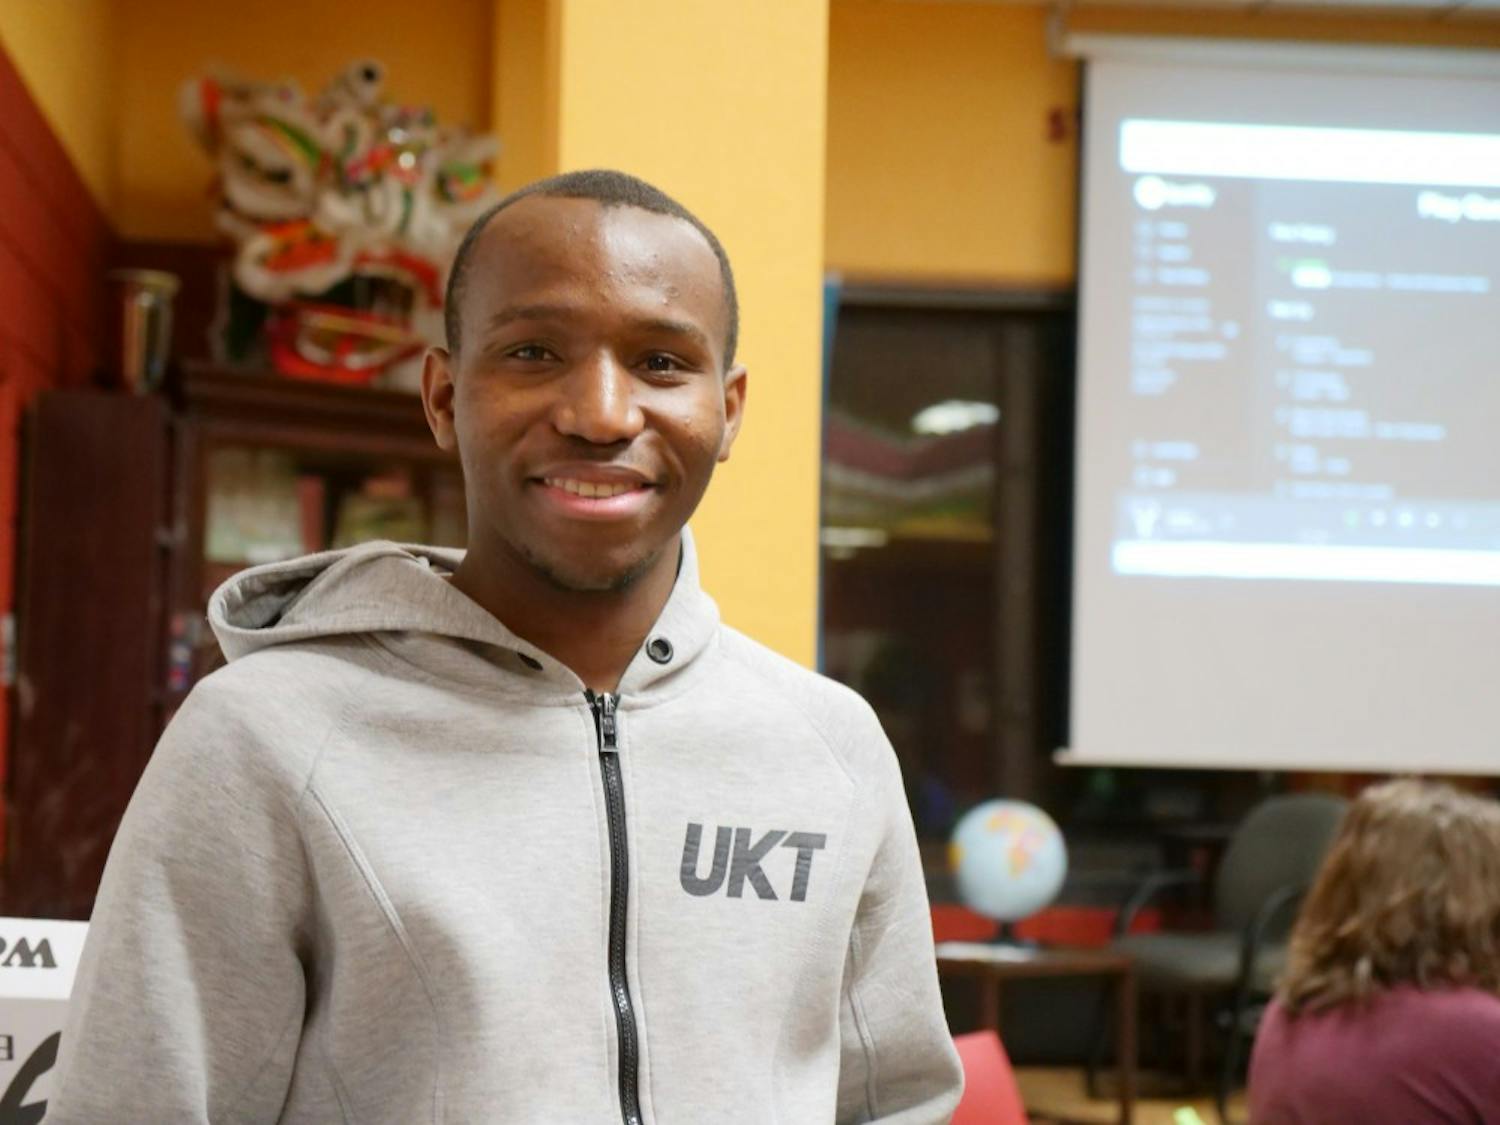 Ousman Kaba, a sophomore computer science major, is a Diversity Advocate at the International Diversity Center and attends the LGBTQ Dinner Crew every month. The dinners offer LGBTQ and ally students the chance to meet and enjoy a meal together.